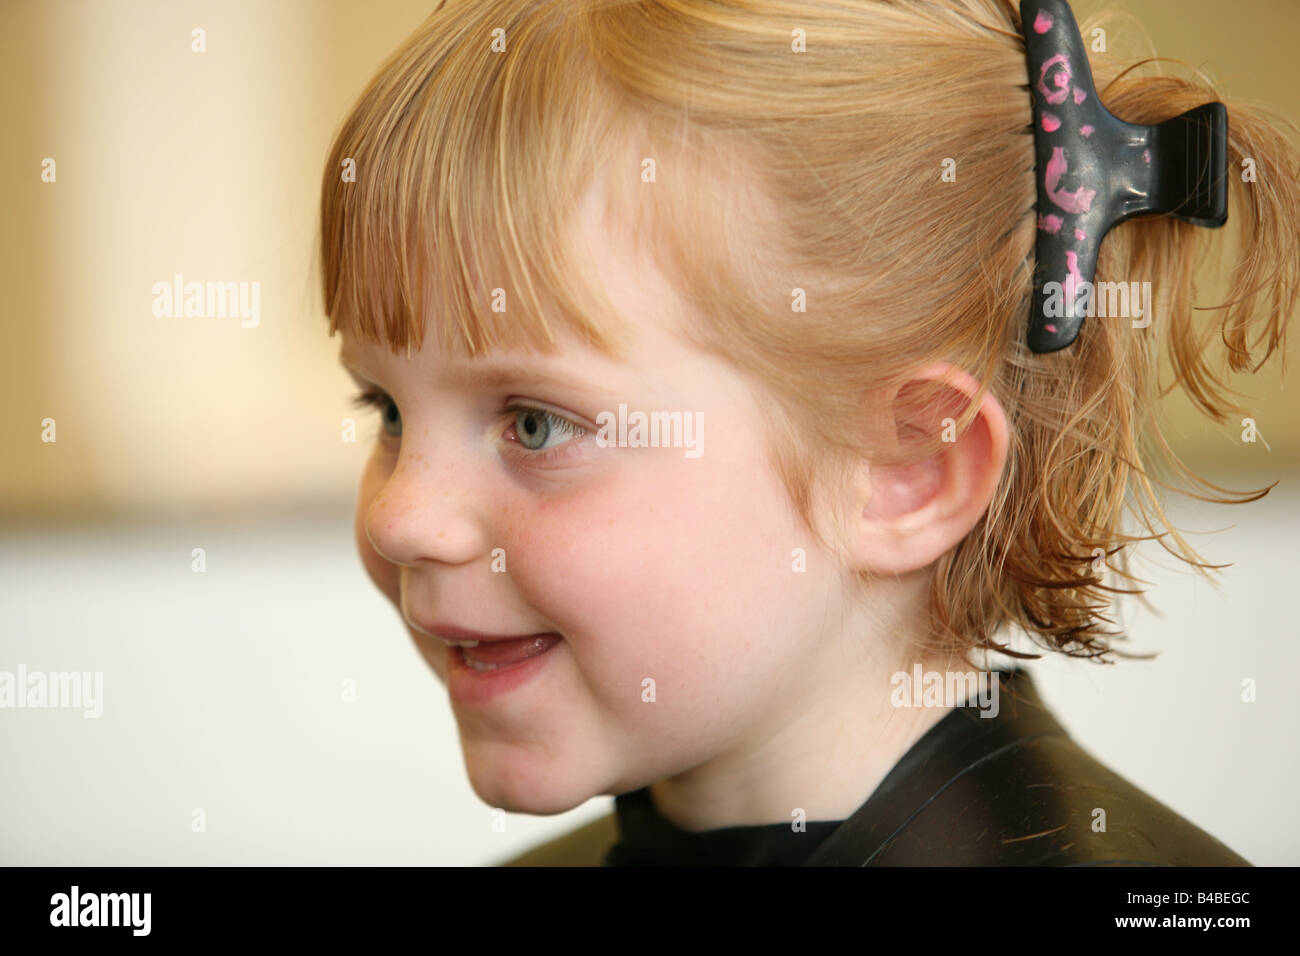 a young girl having her hair cut at a hairdressers Stock Photo